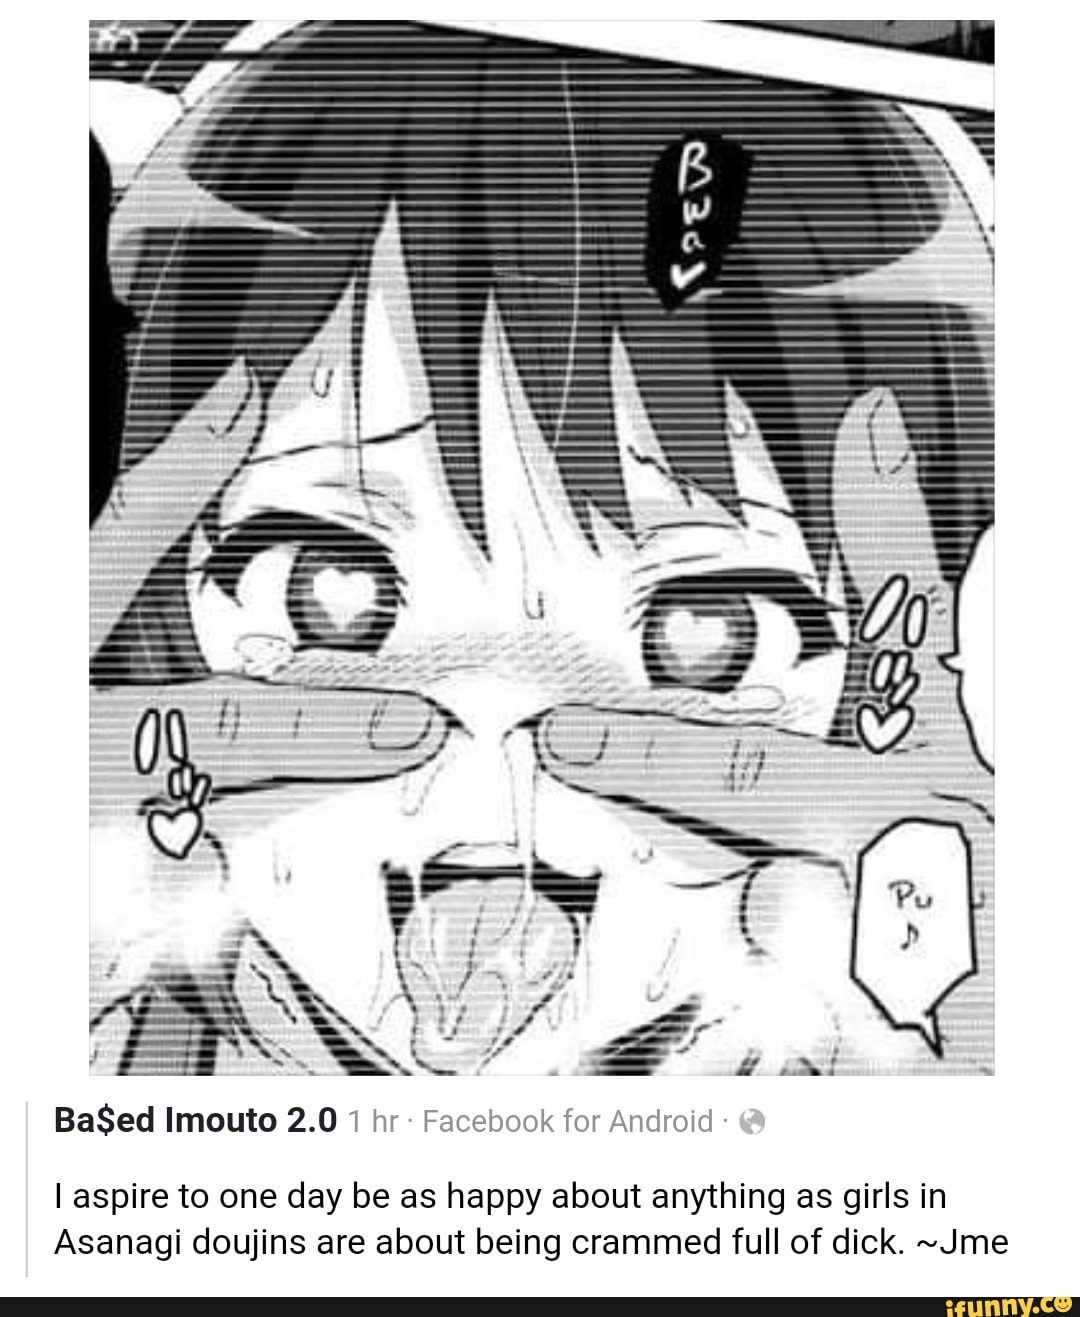 Ba Ed Imouto 2 0 I N Facebook For Android Iaspire To One Day Be As Happy About Anything As Girls In Asanagi Doujins Are About Being Crammed Full Of Dick Jme